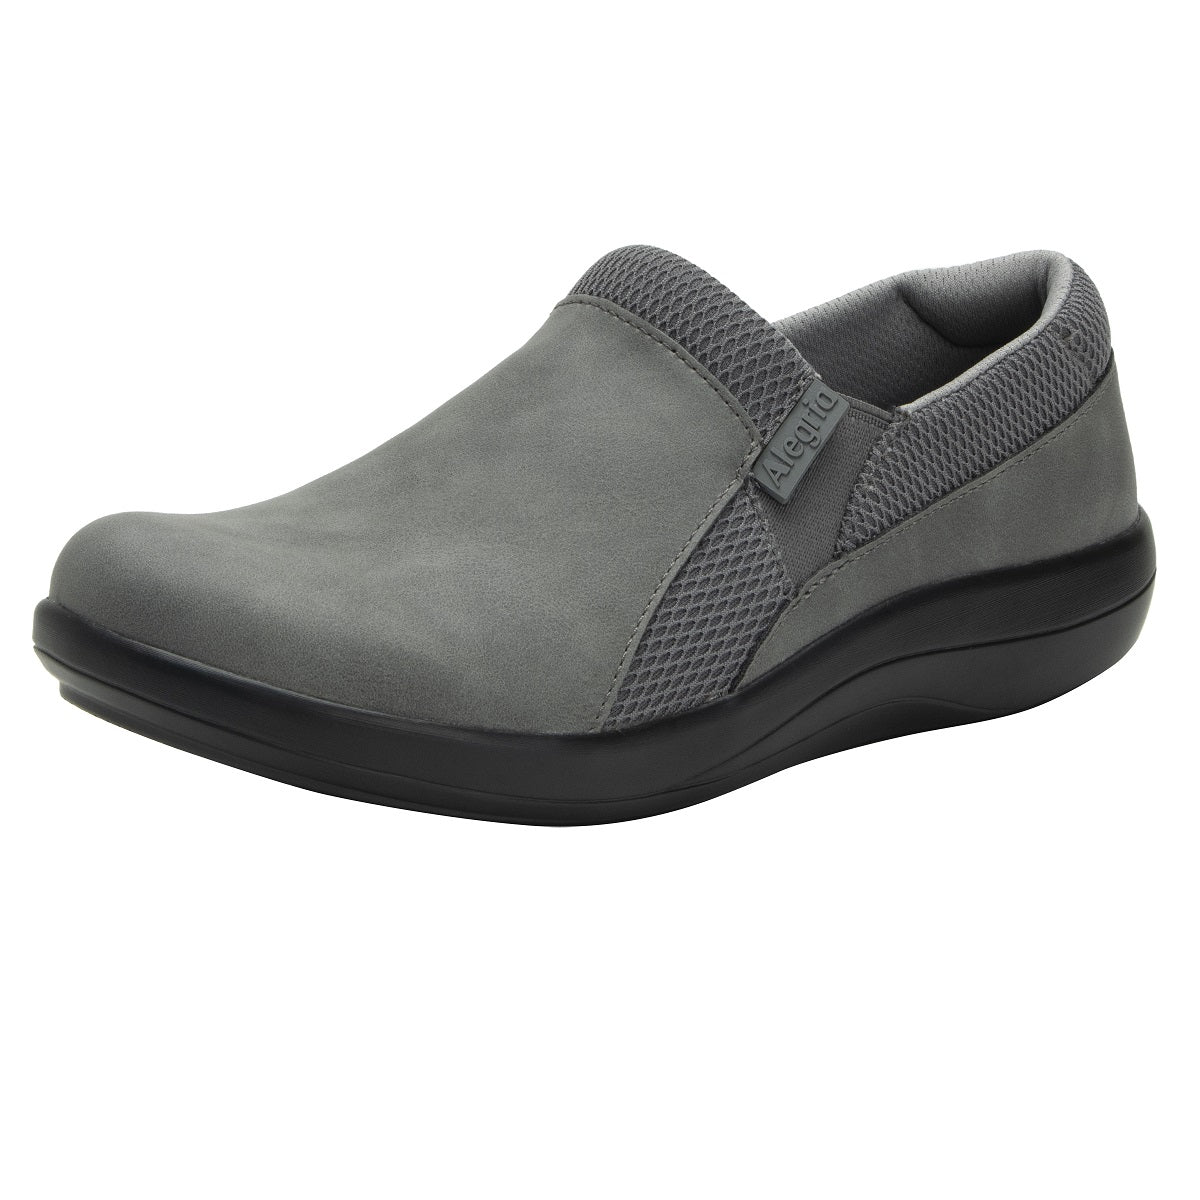 Alegria Duette Shoe in Grey at Parker's Clothing and Shoes.